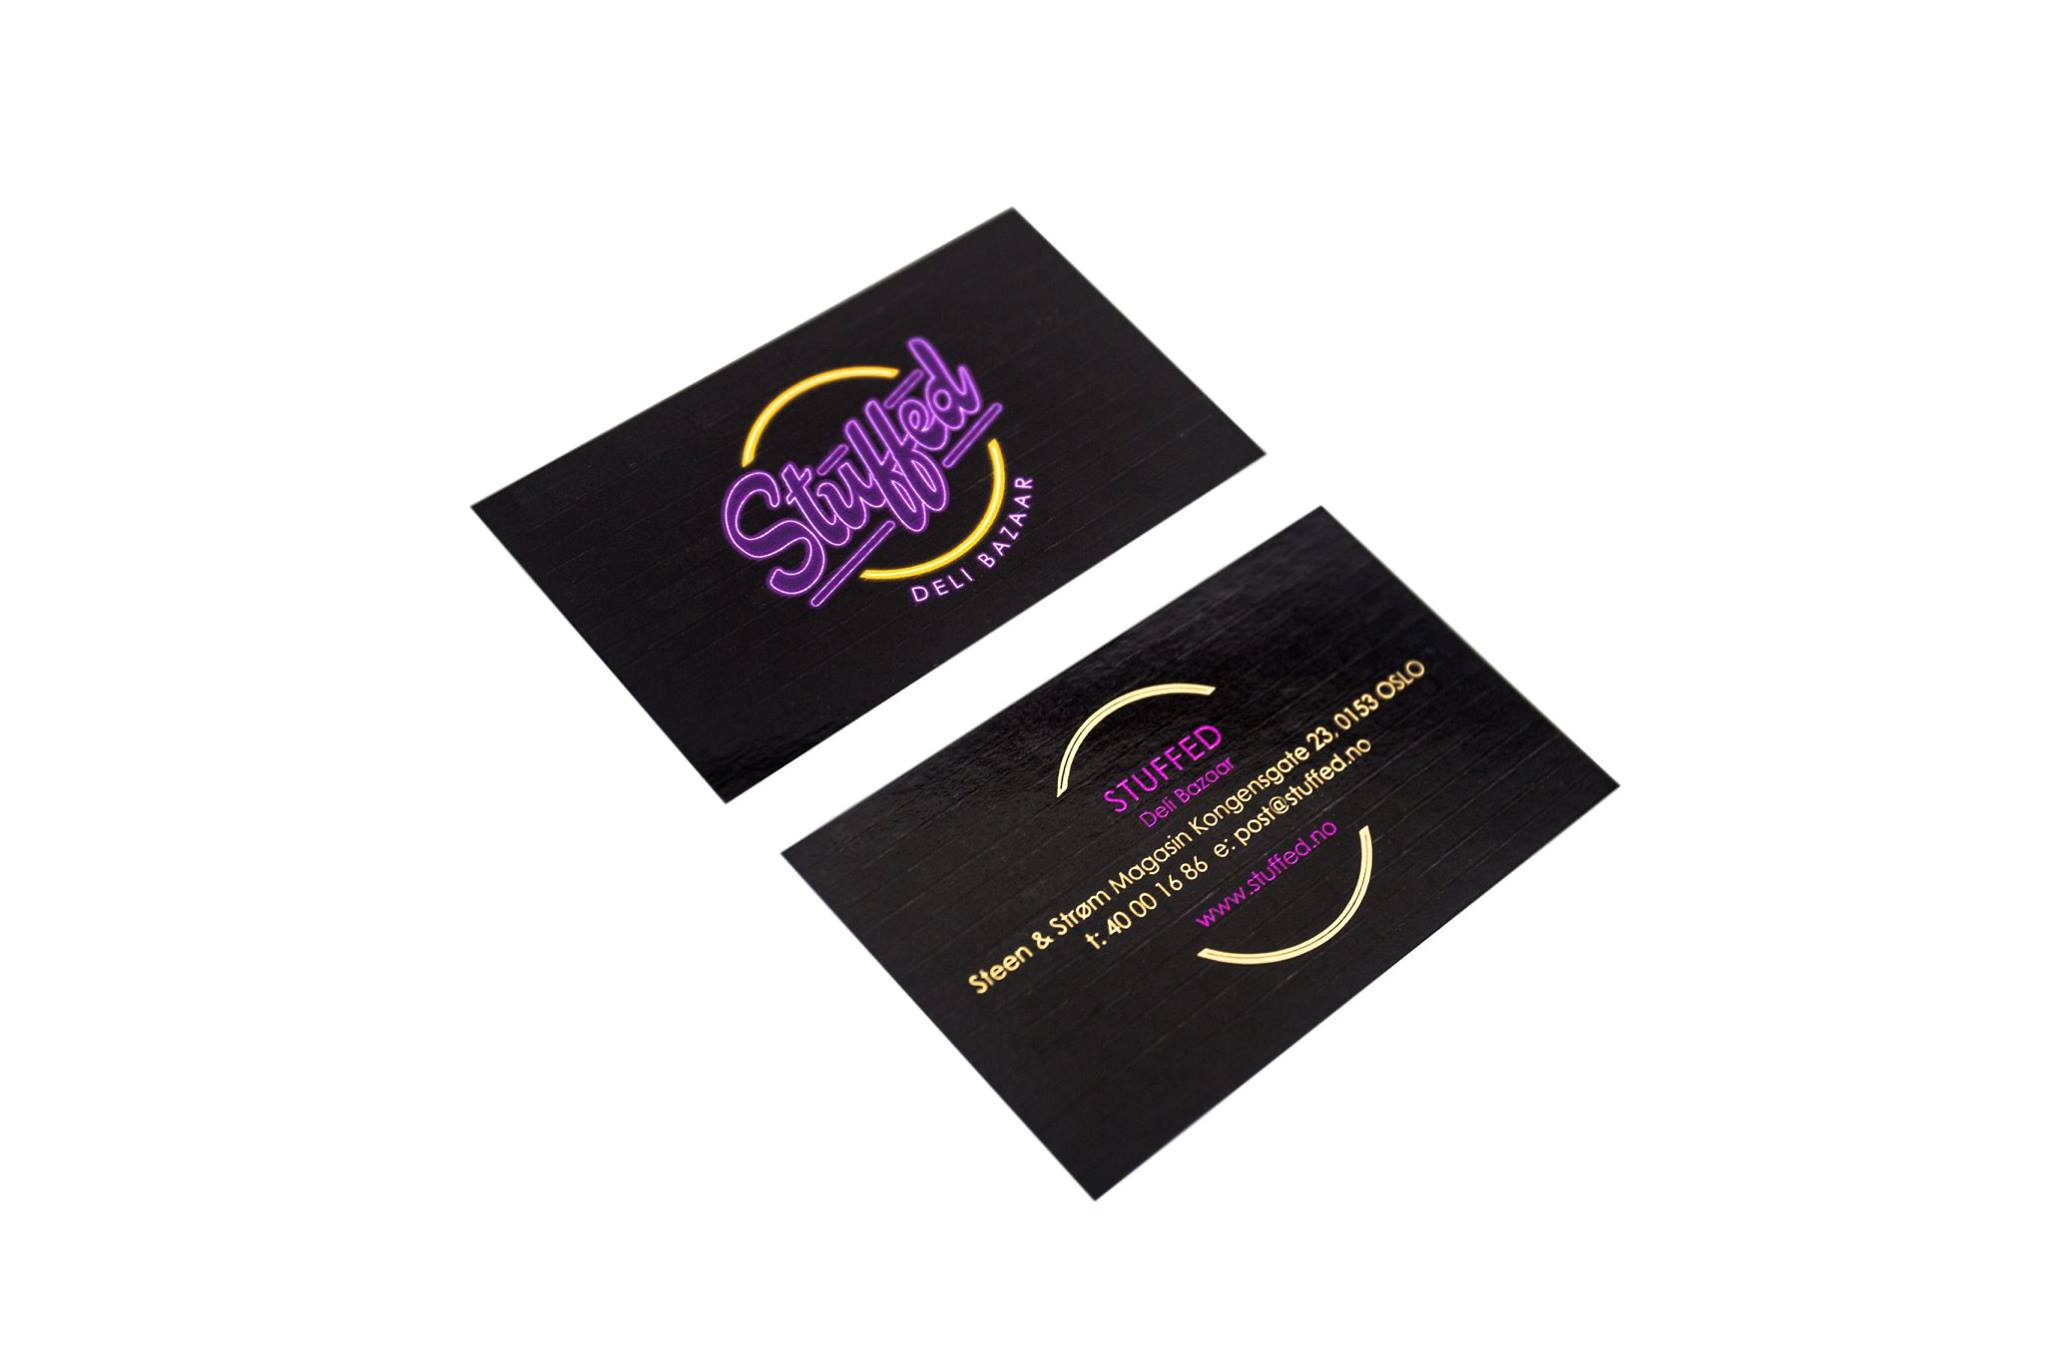 Outlet Cards Printing and Design by Creative Digital Print